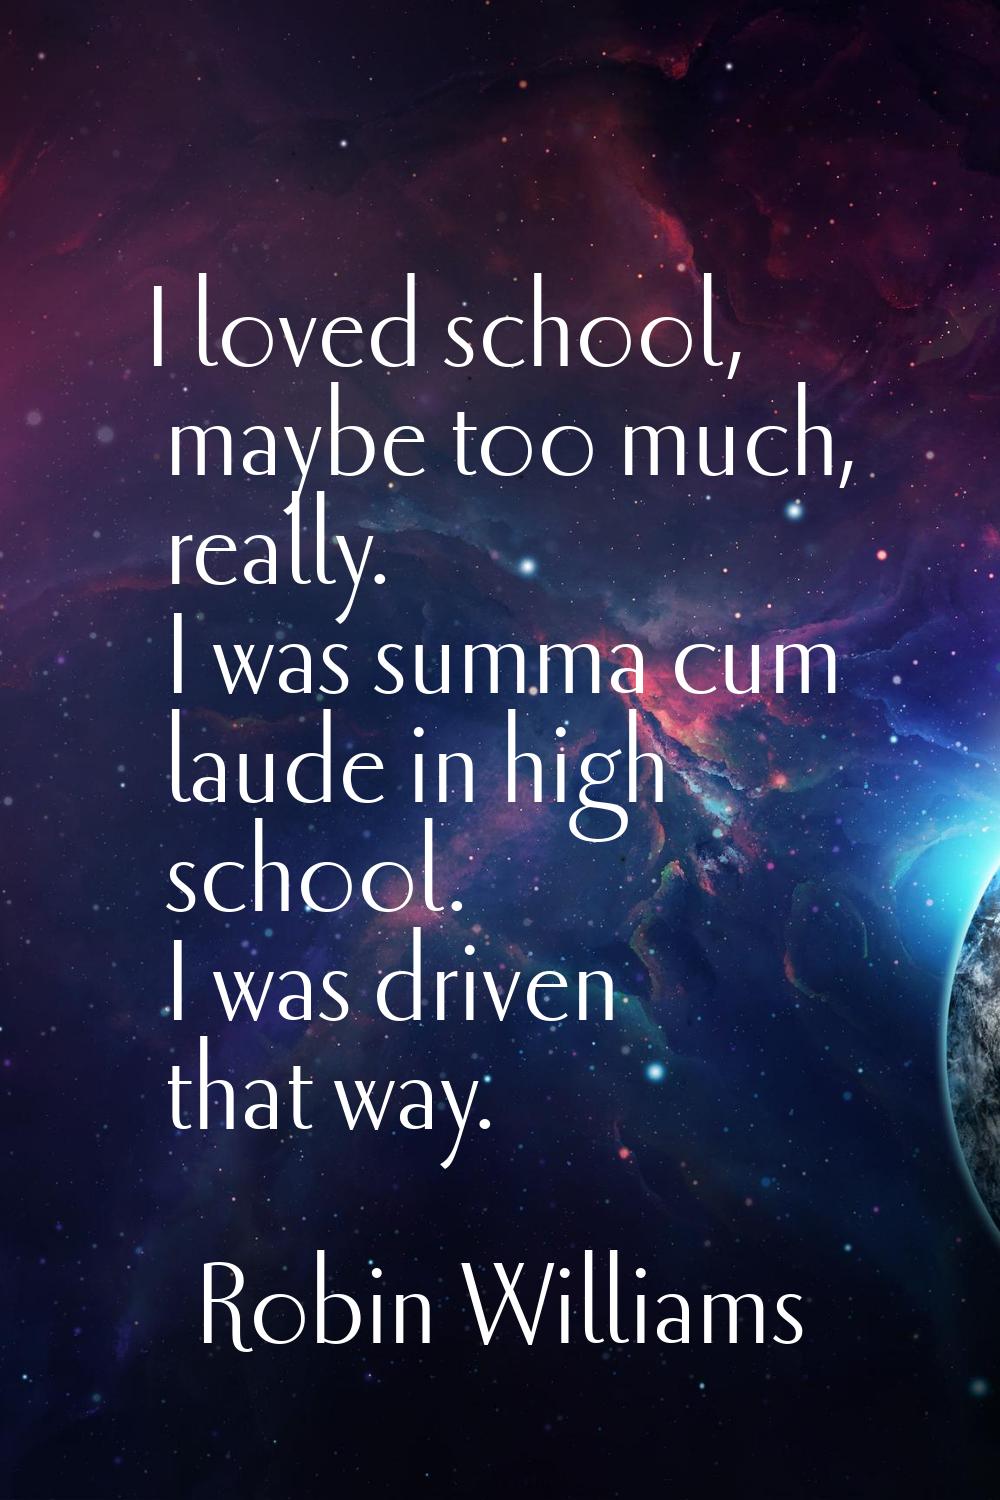 I loved school, maybe too much, really. I was summa cum laude in high school. I was driven that way